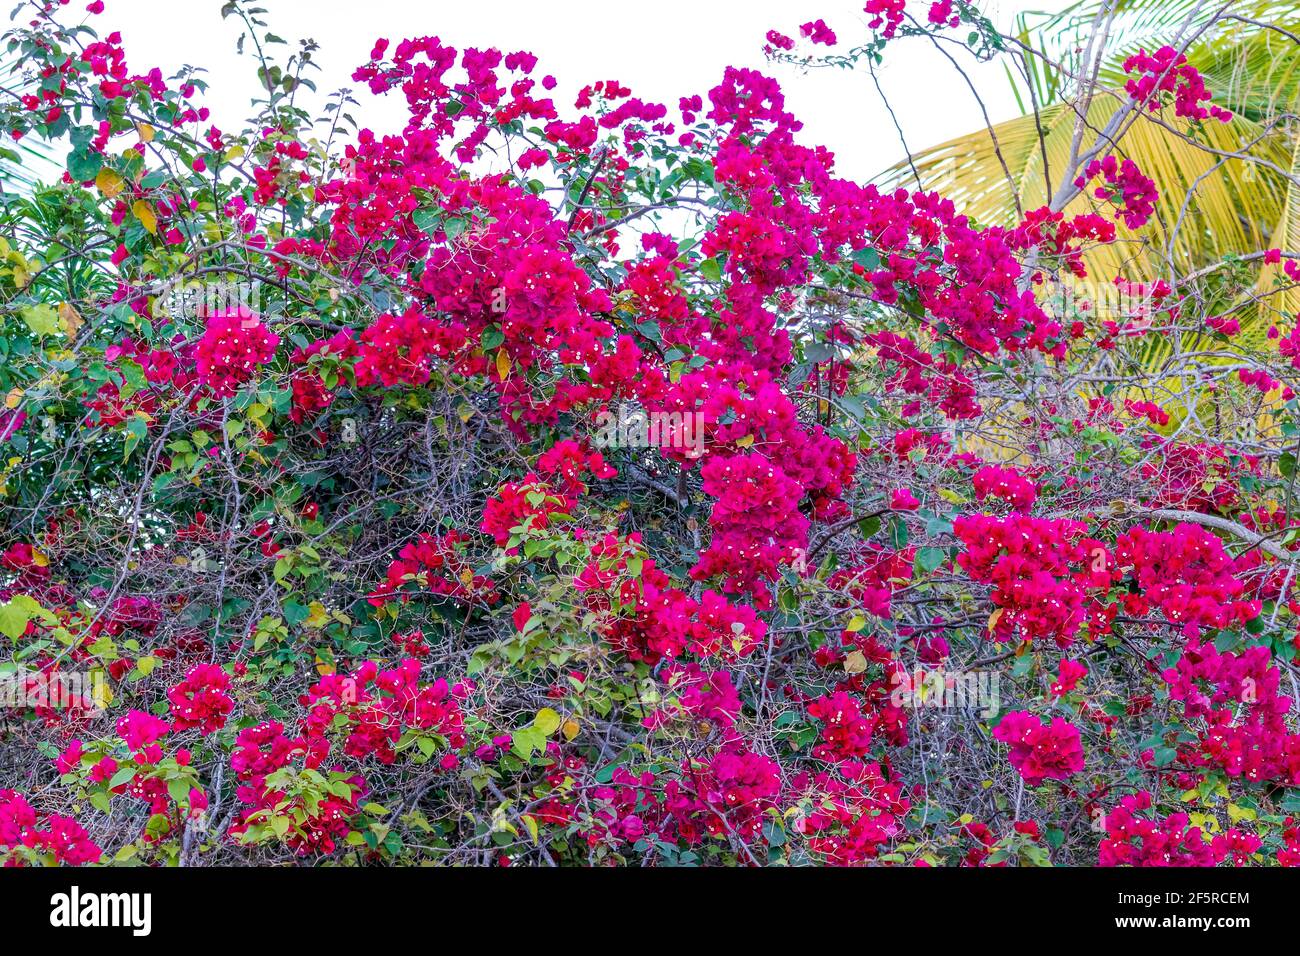 Bougainvillea flowers blooming on the side of a house Stock Photo